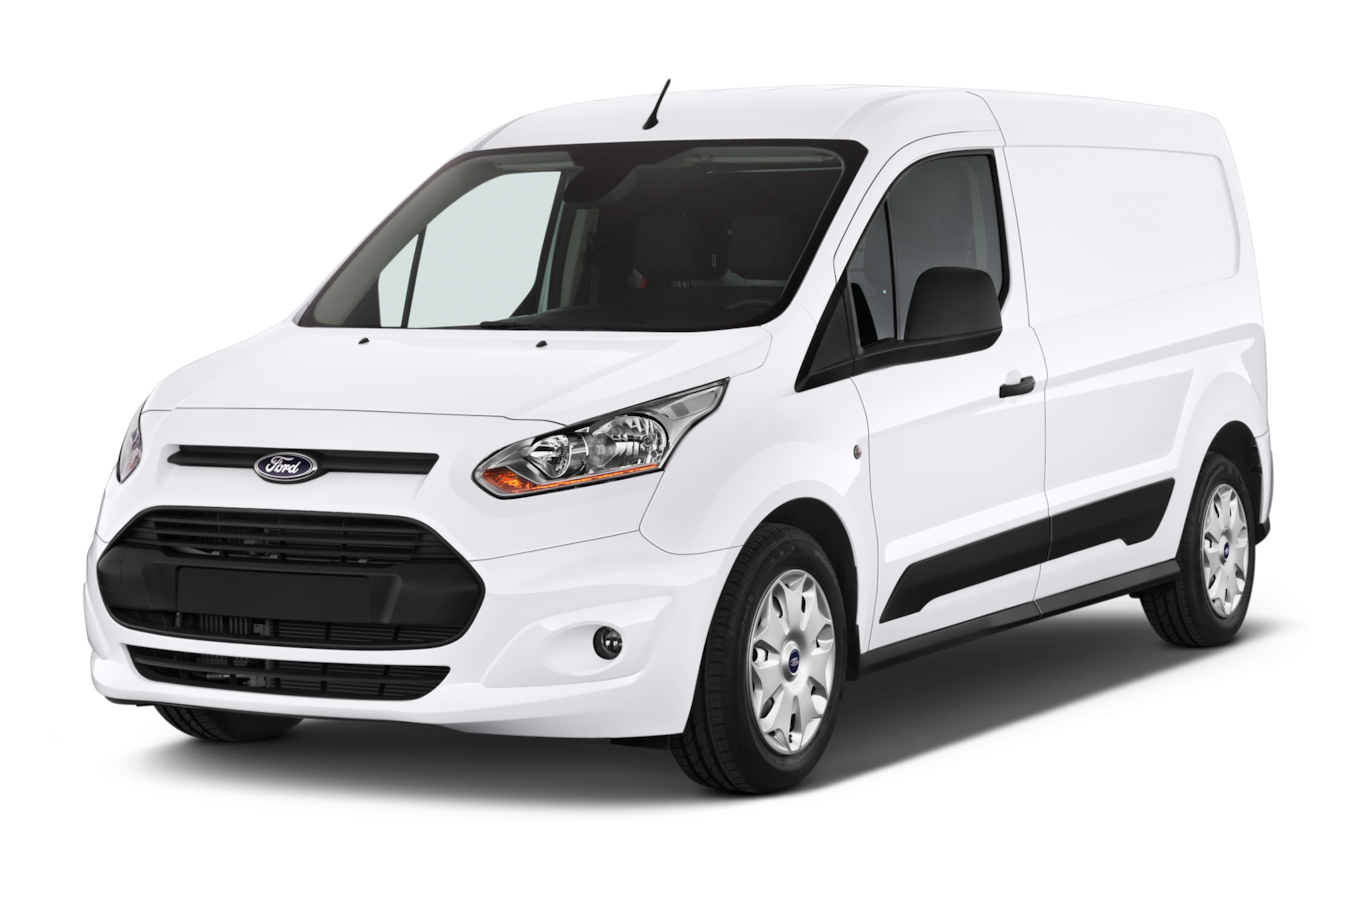 Cargo Van - Small Van For Furniture Delivery and small moves